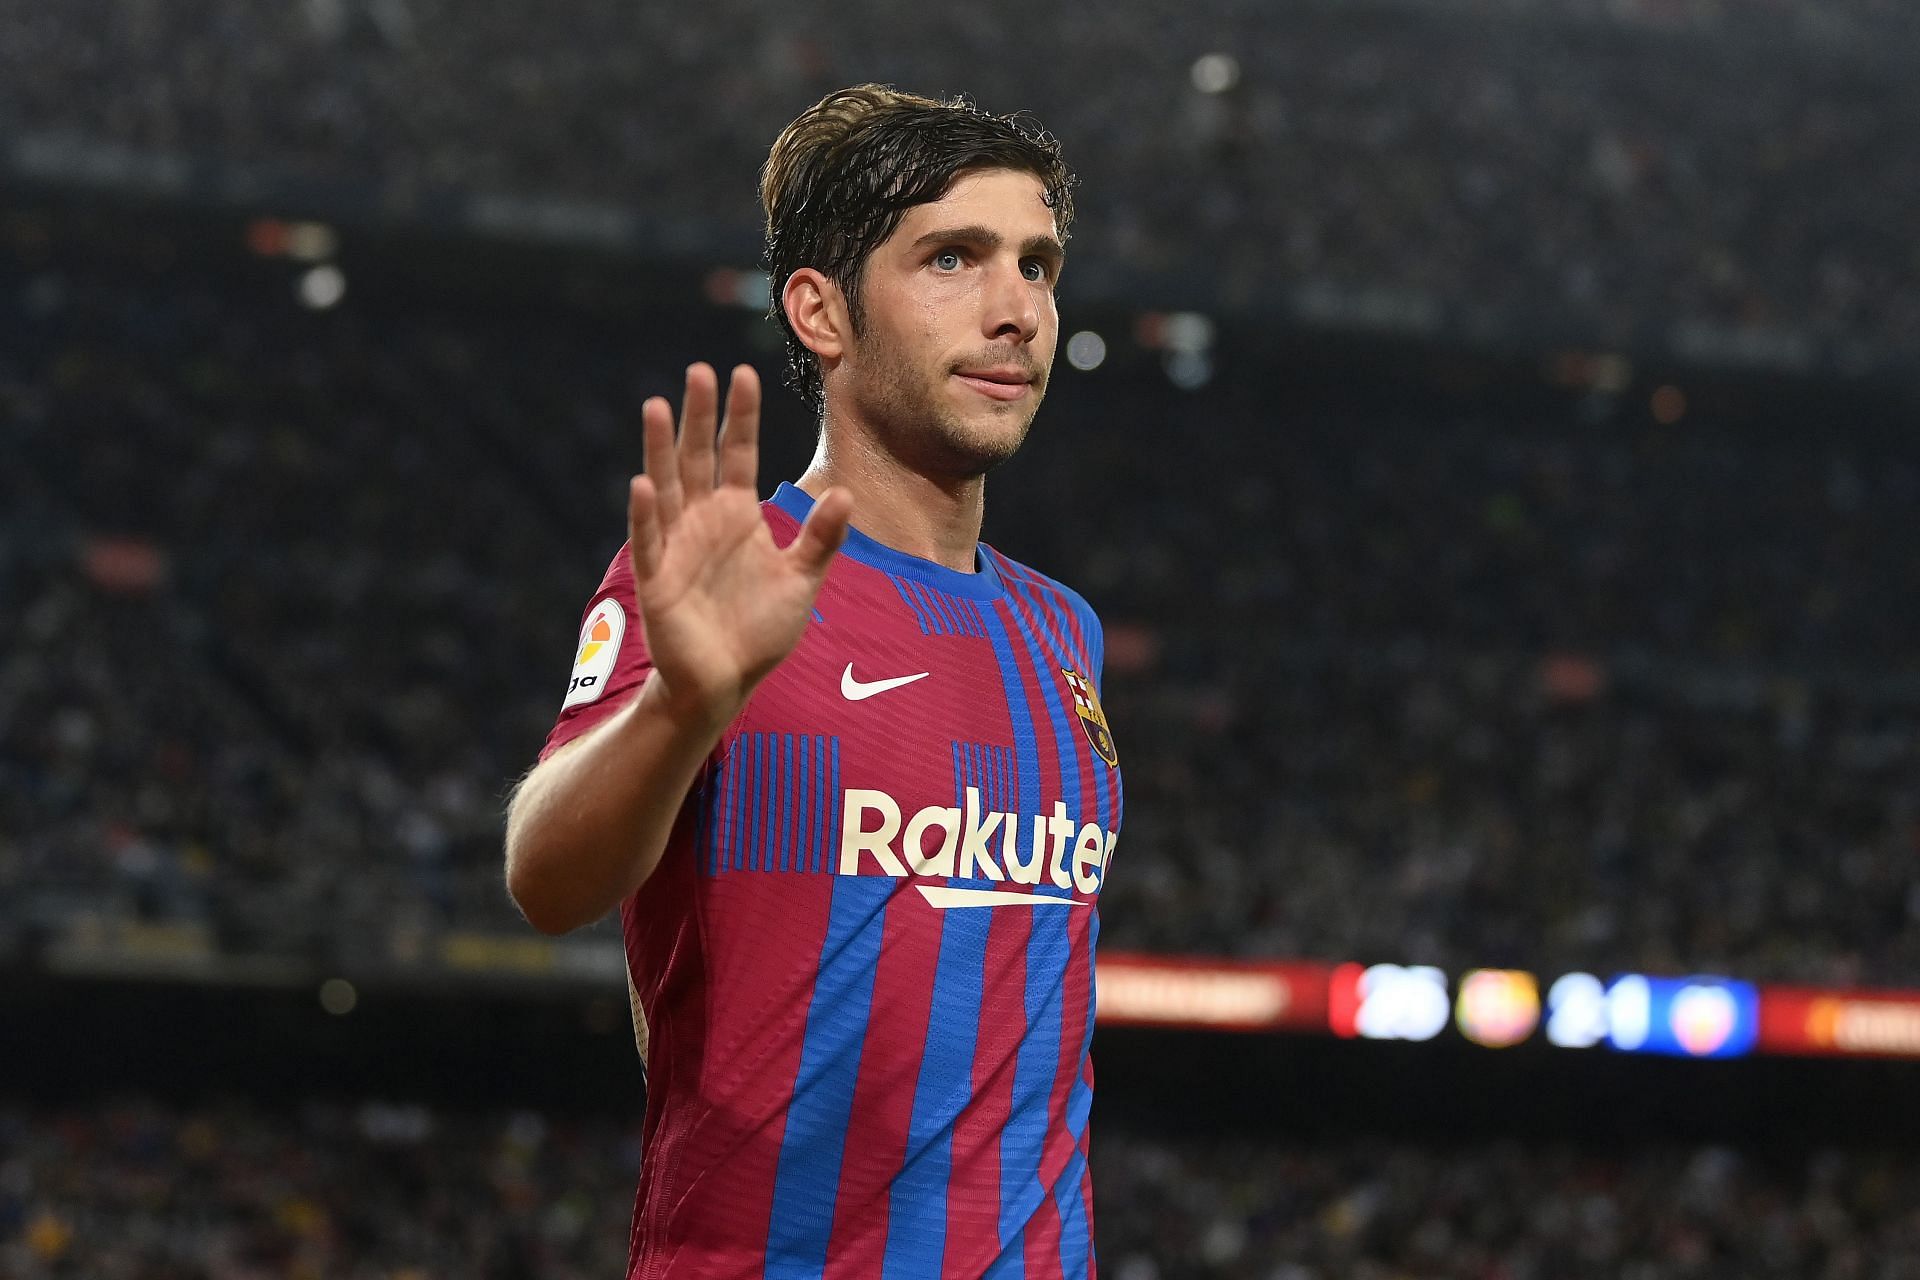 Sergi Roberto could also leave this summer.